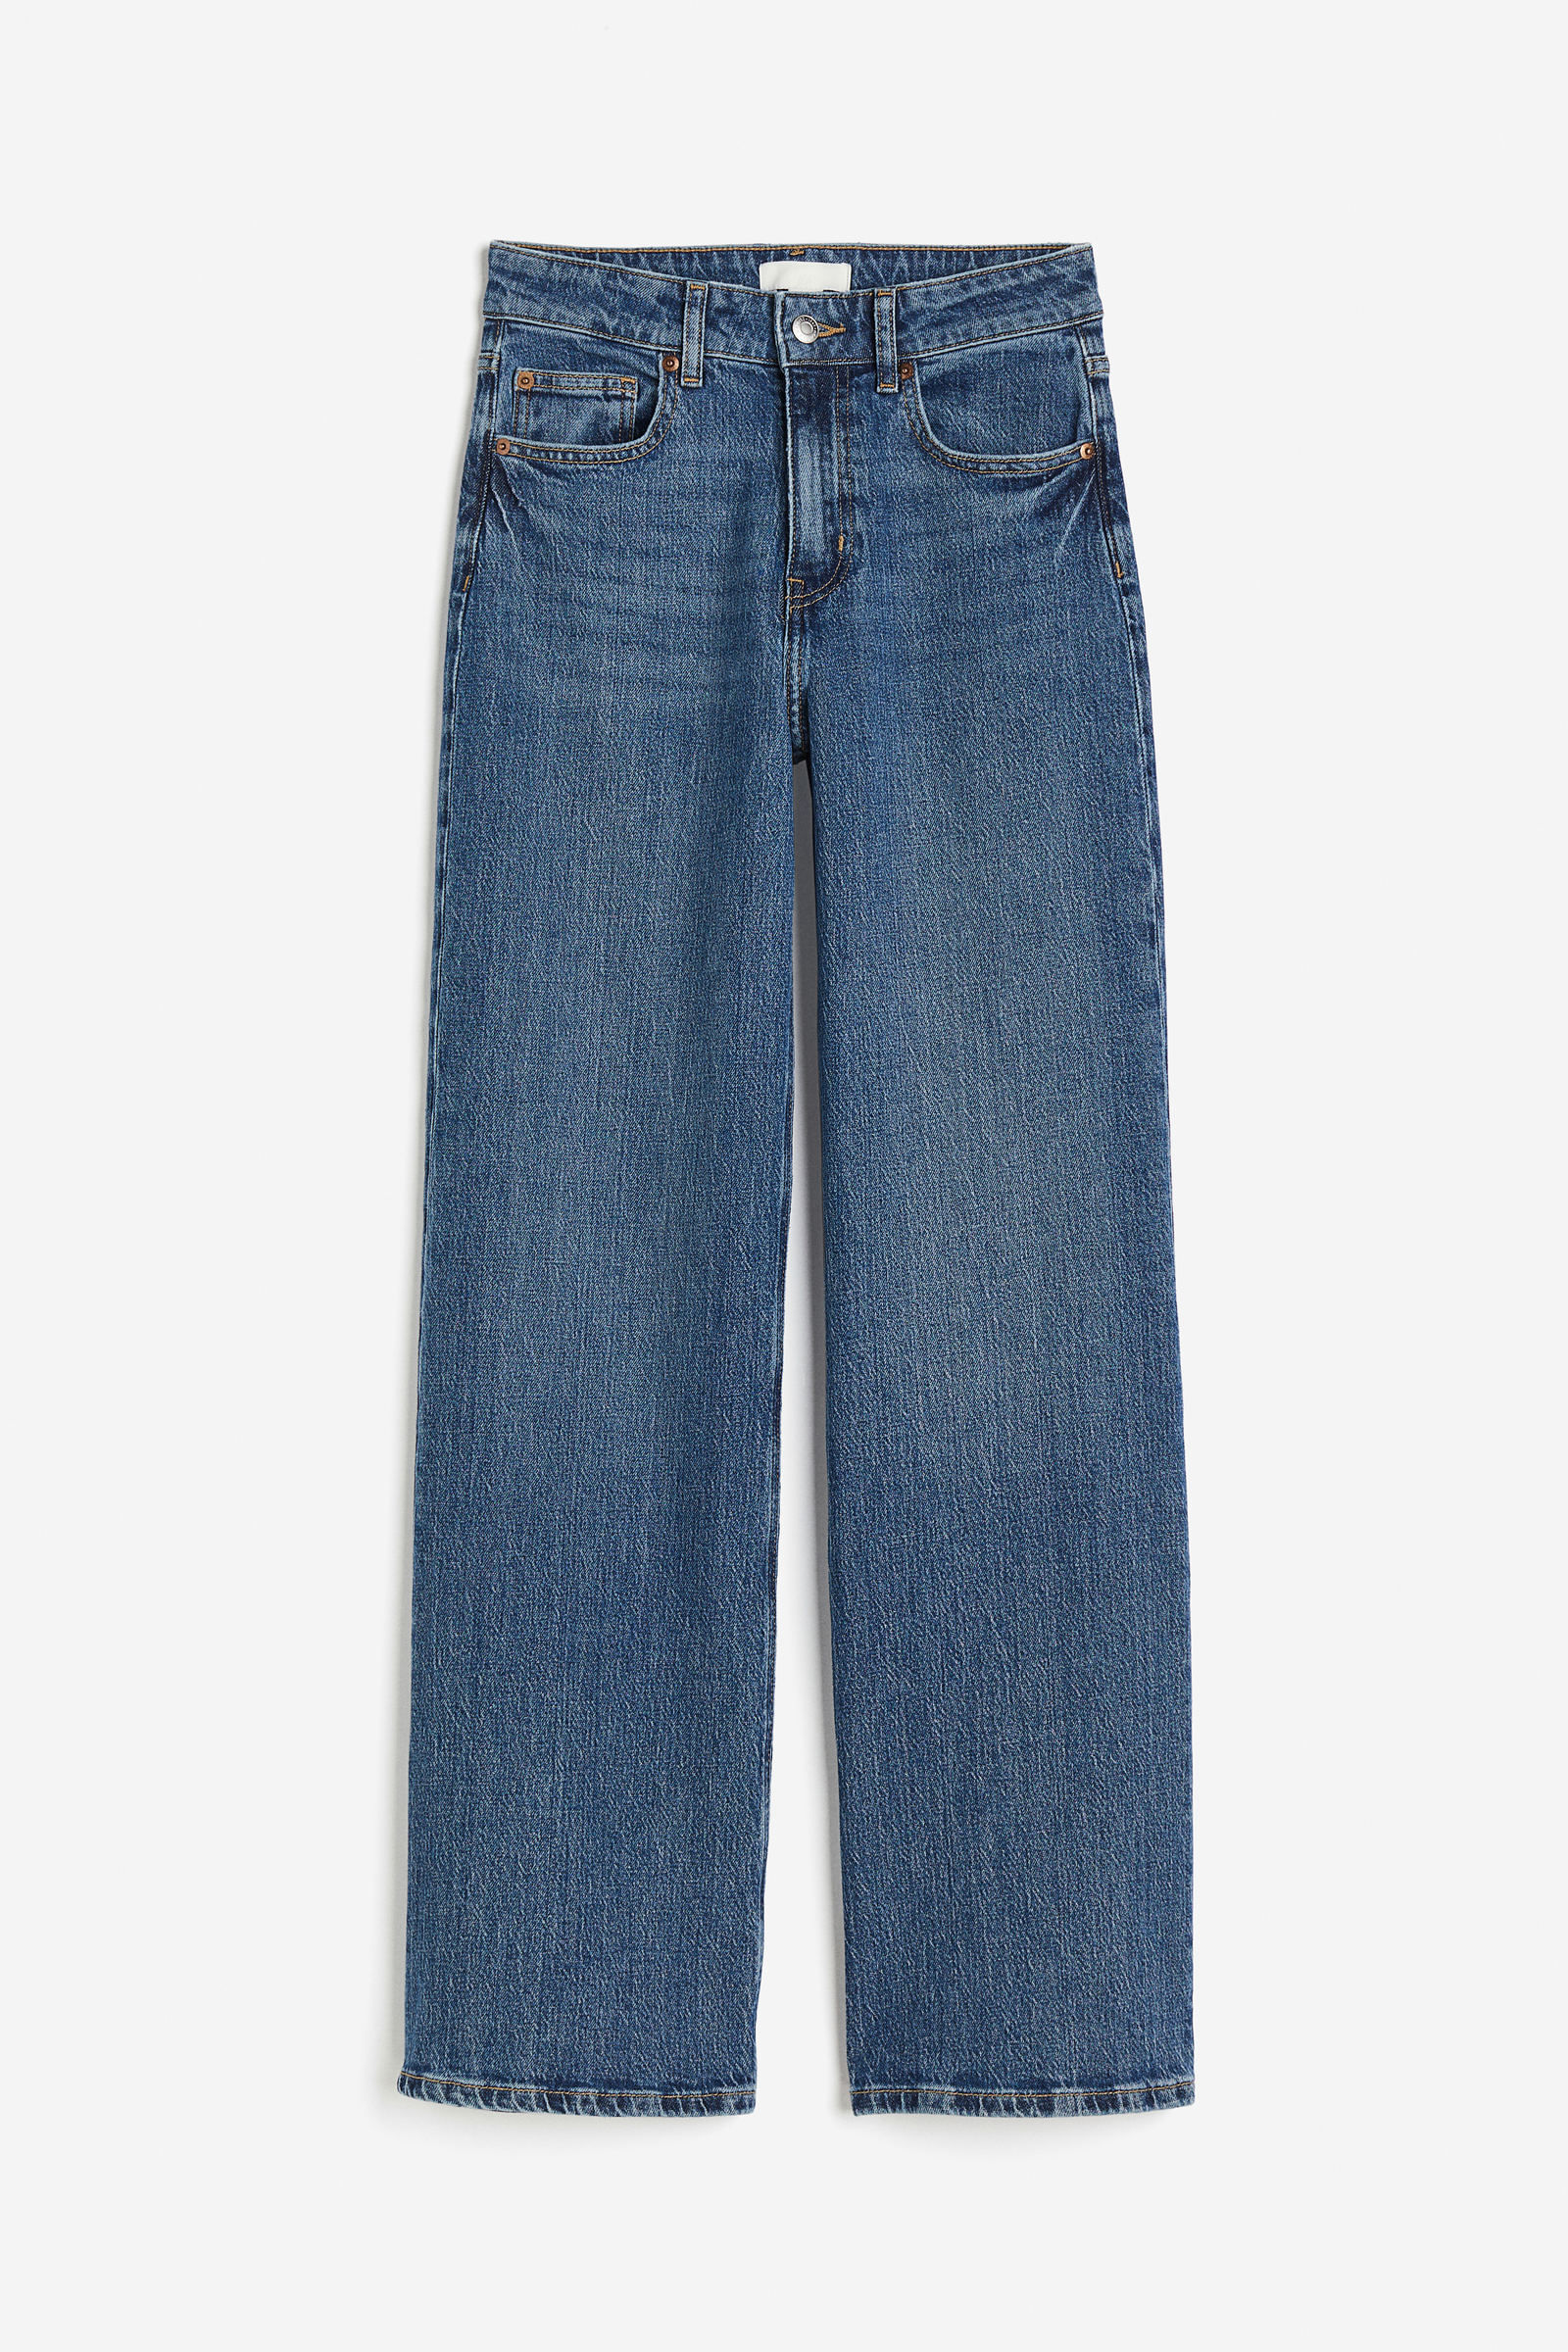 Jeans para mujer wide high, straight high y más - H&M PE